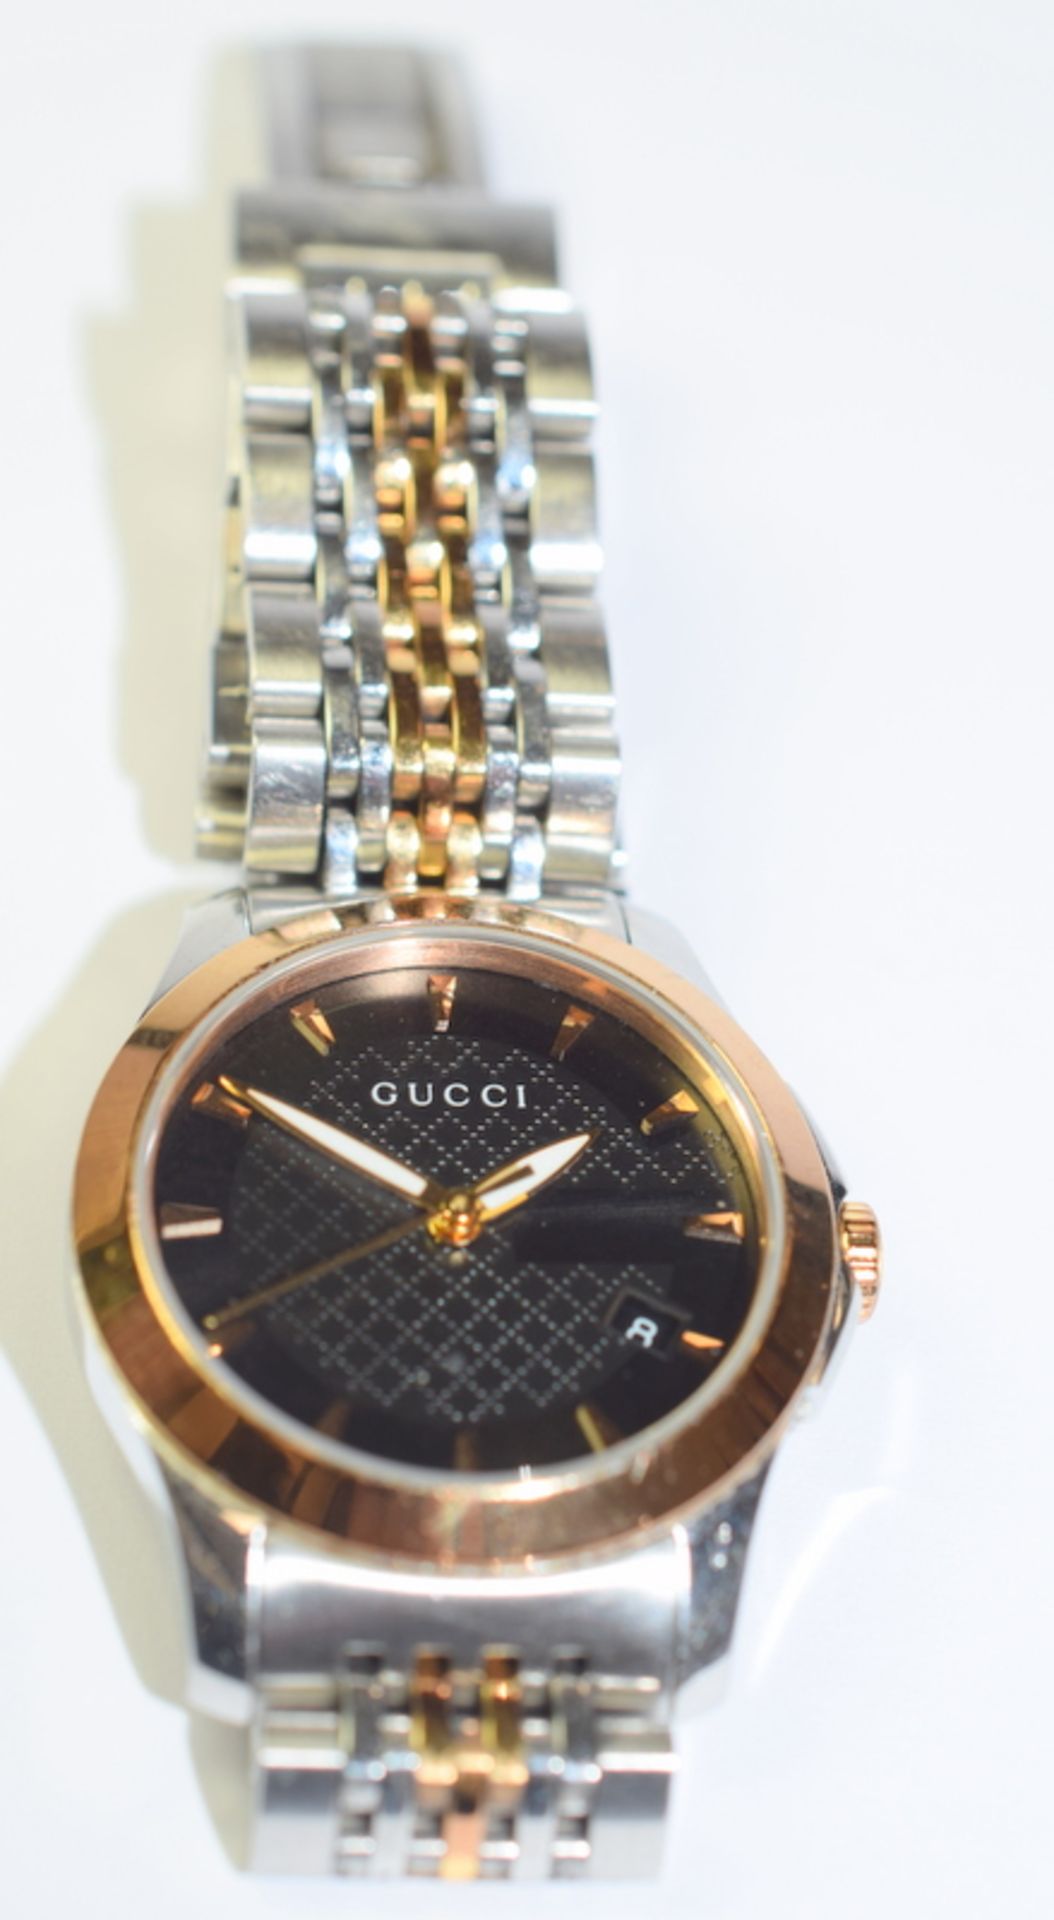 Lady's Gucci G-Timeless watch. - Image 5 of 6